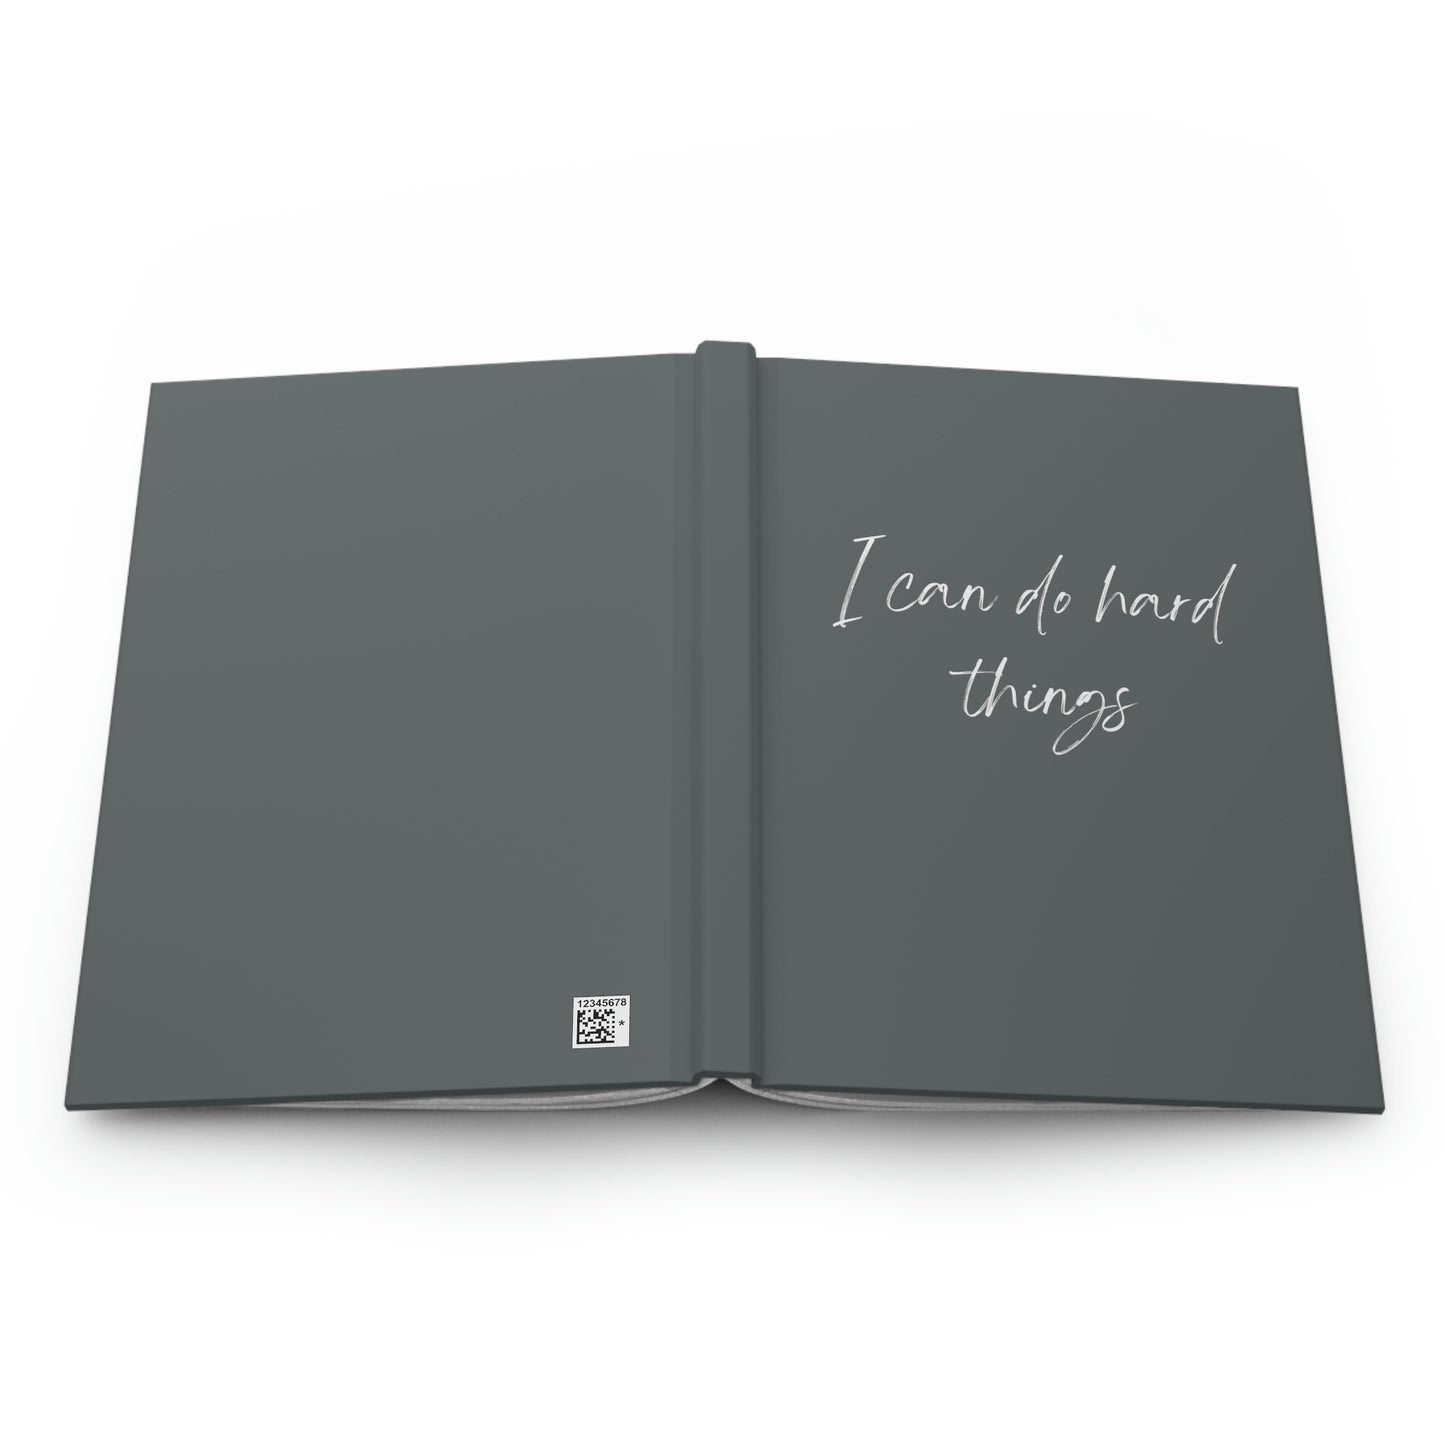 I can do hard things - Hardcover Journal